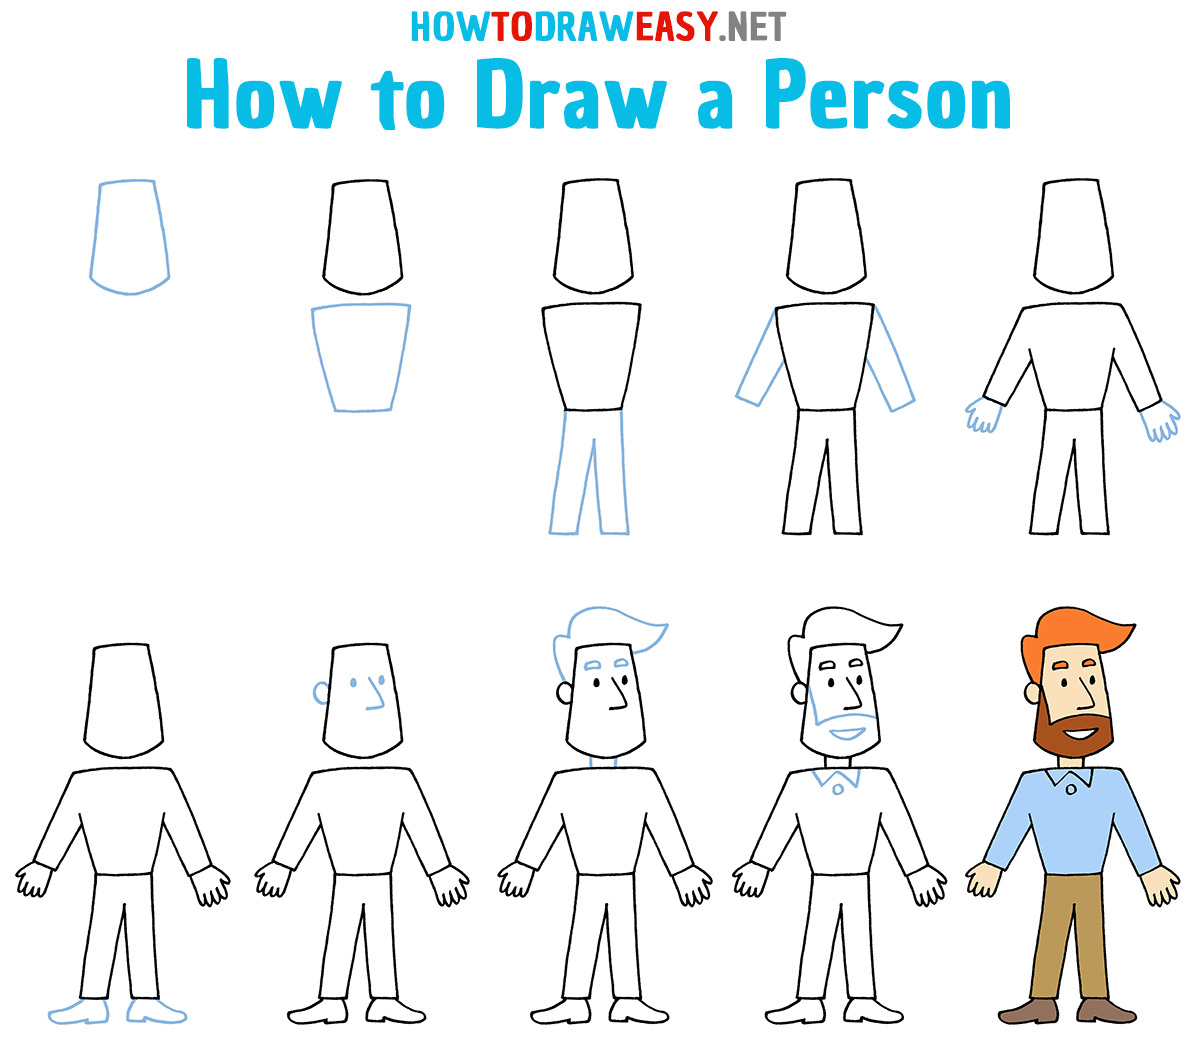 How to Draw a Person Step by Step